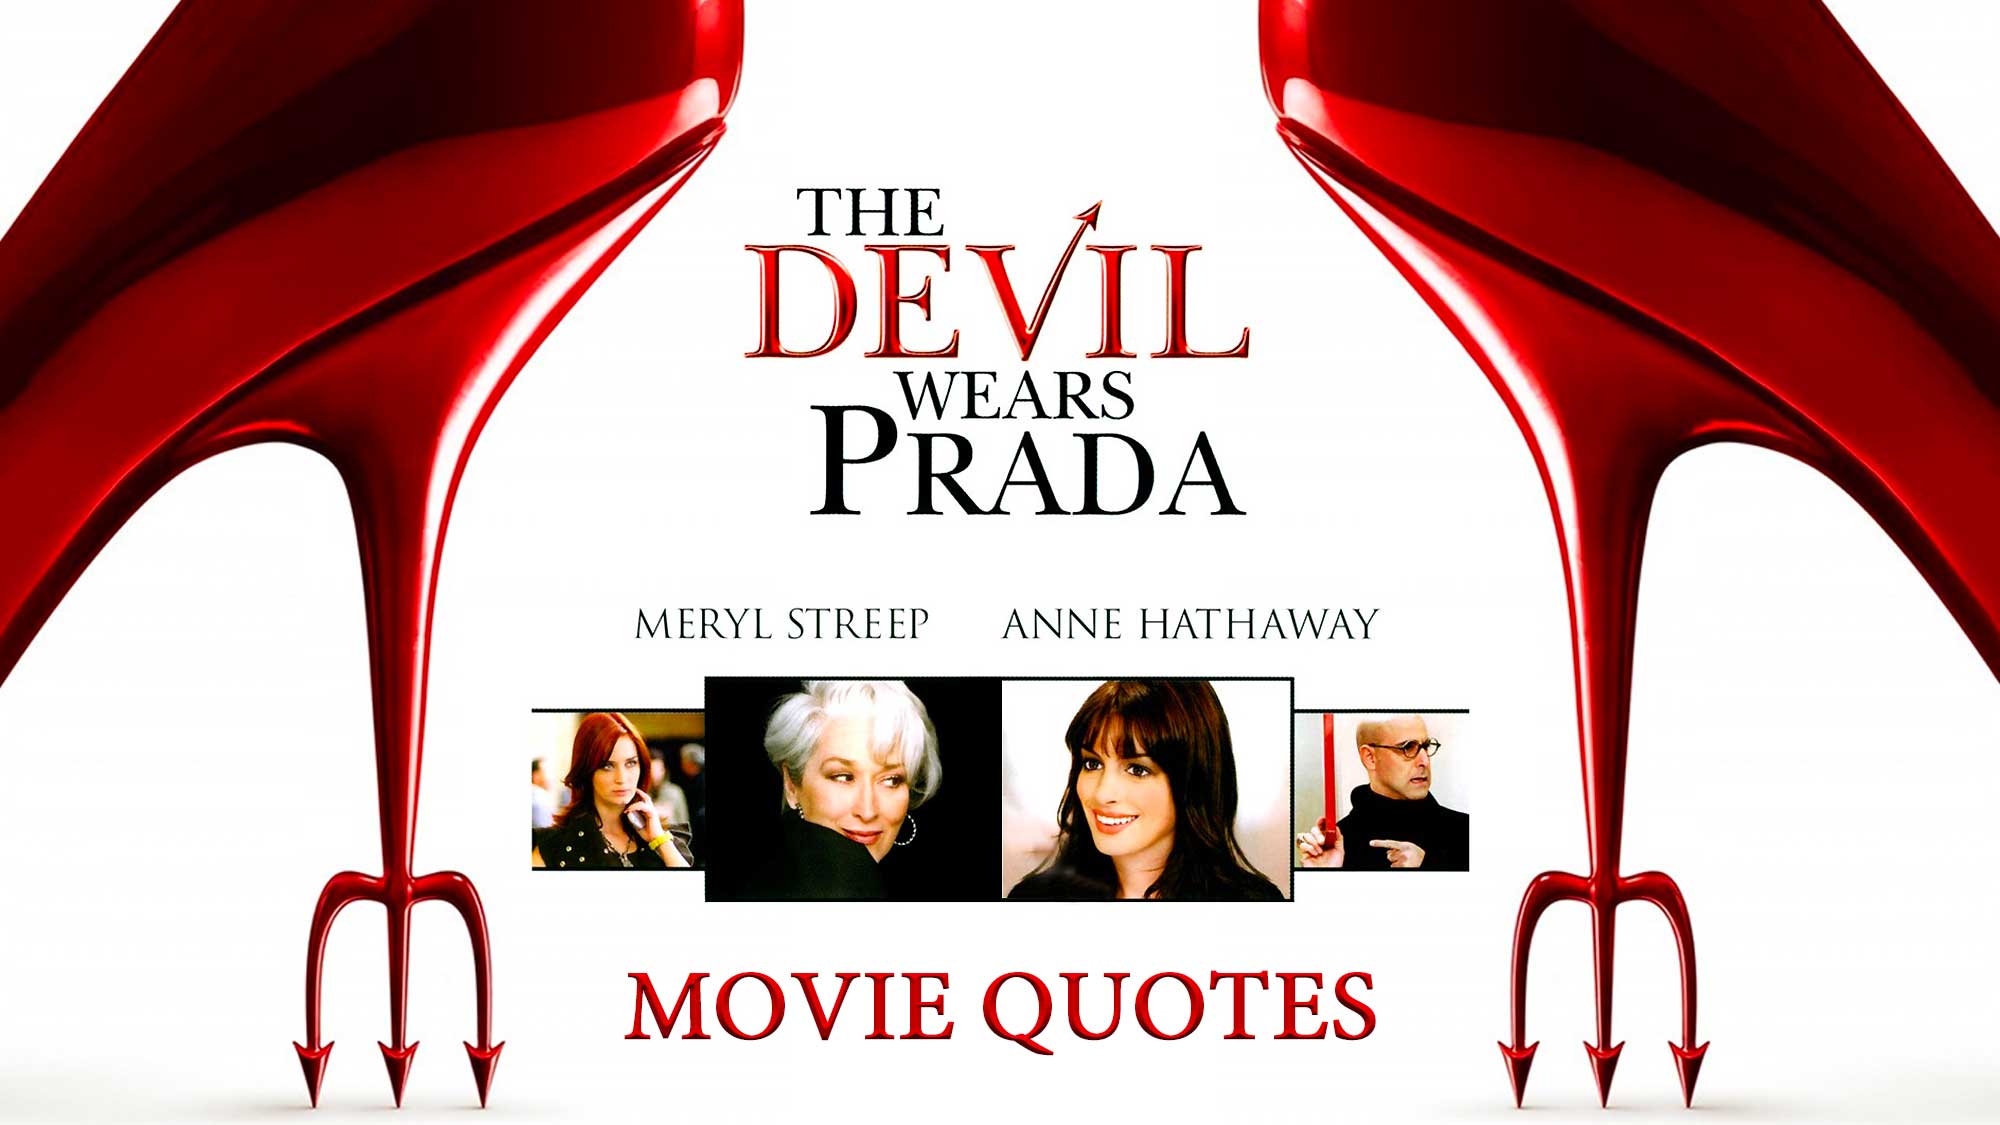 The 10 Best Quotes From The Movie The Devil Wears Prada - How Many Do You Remember?